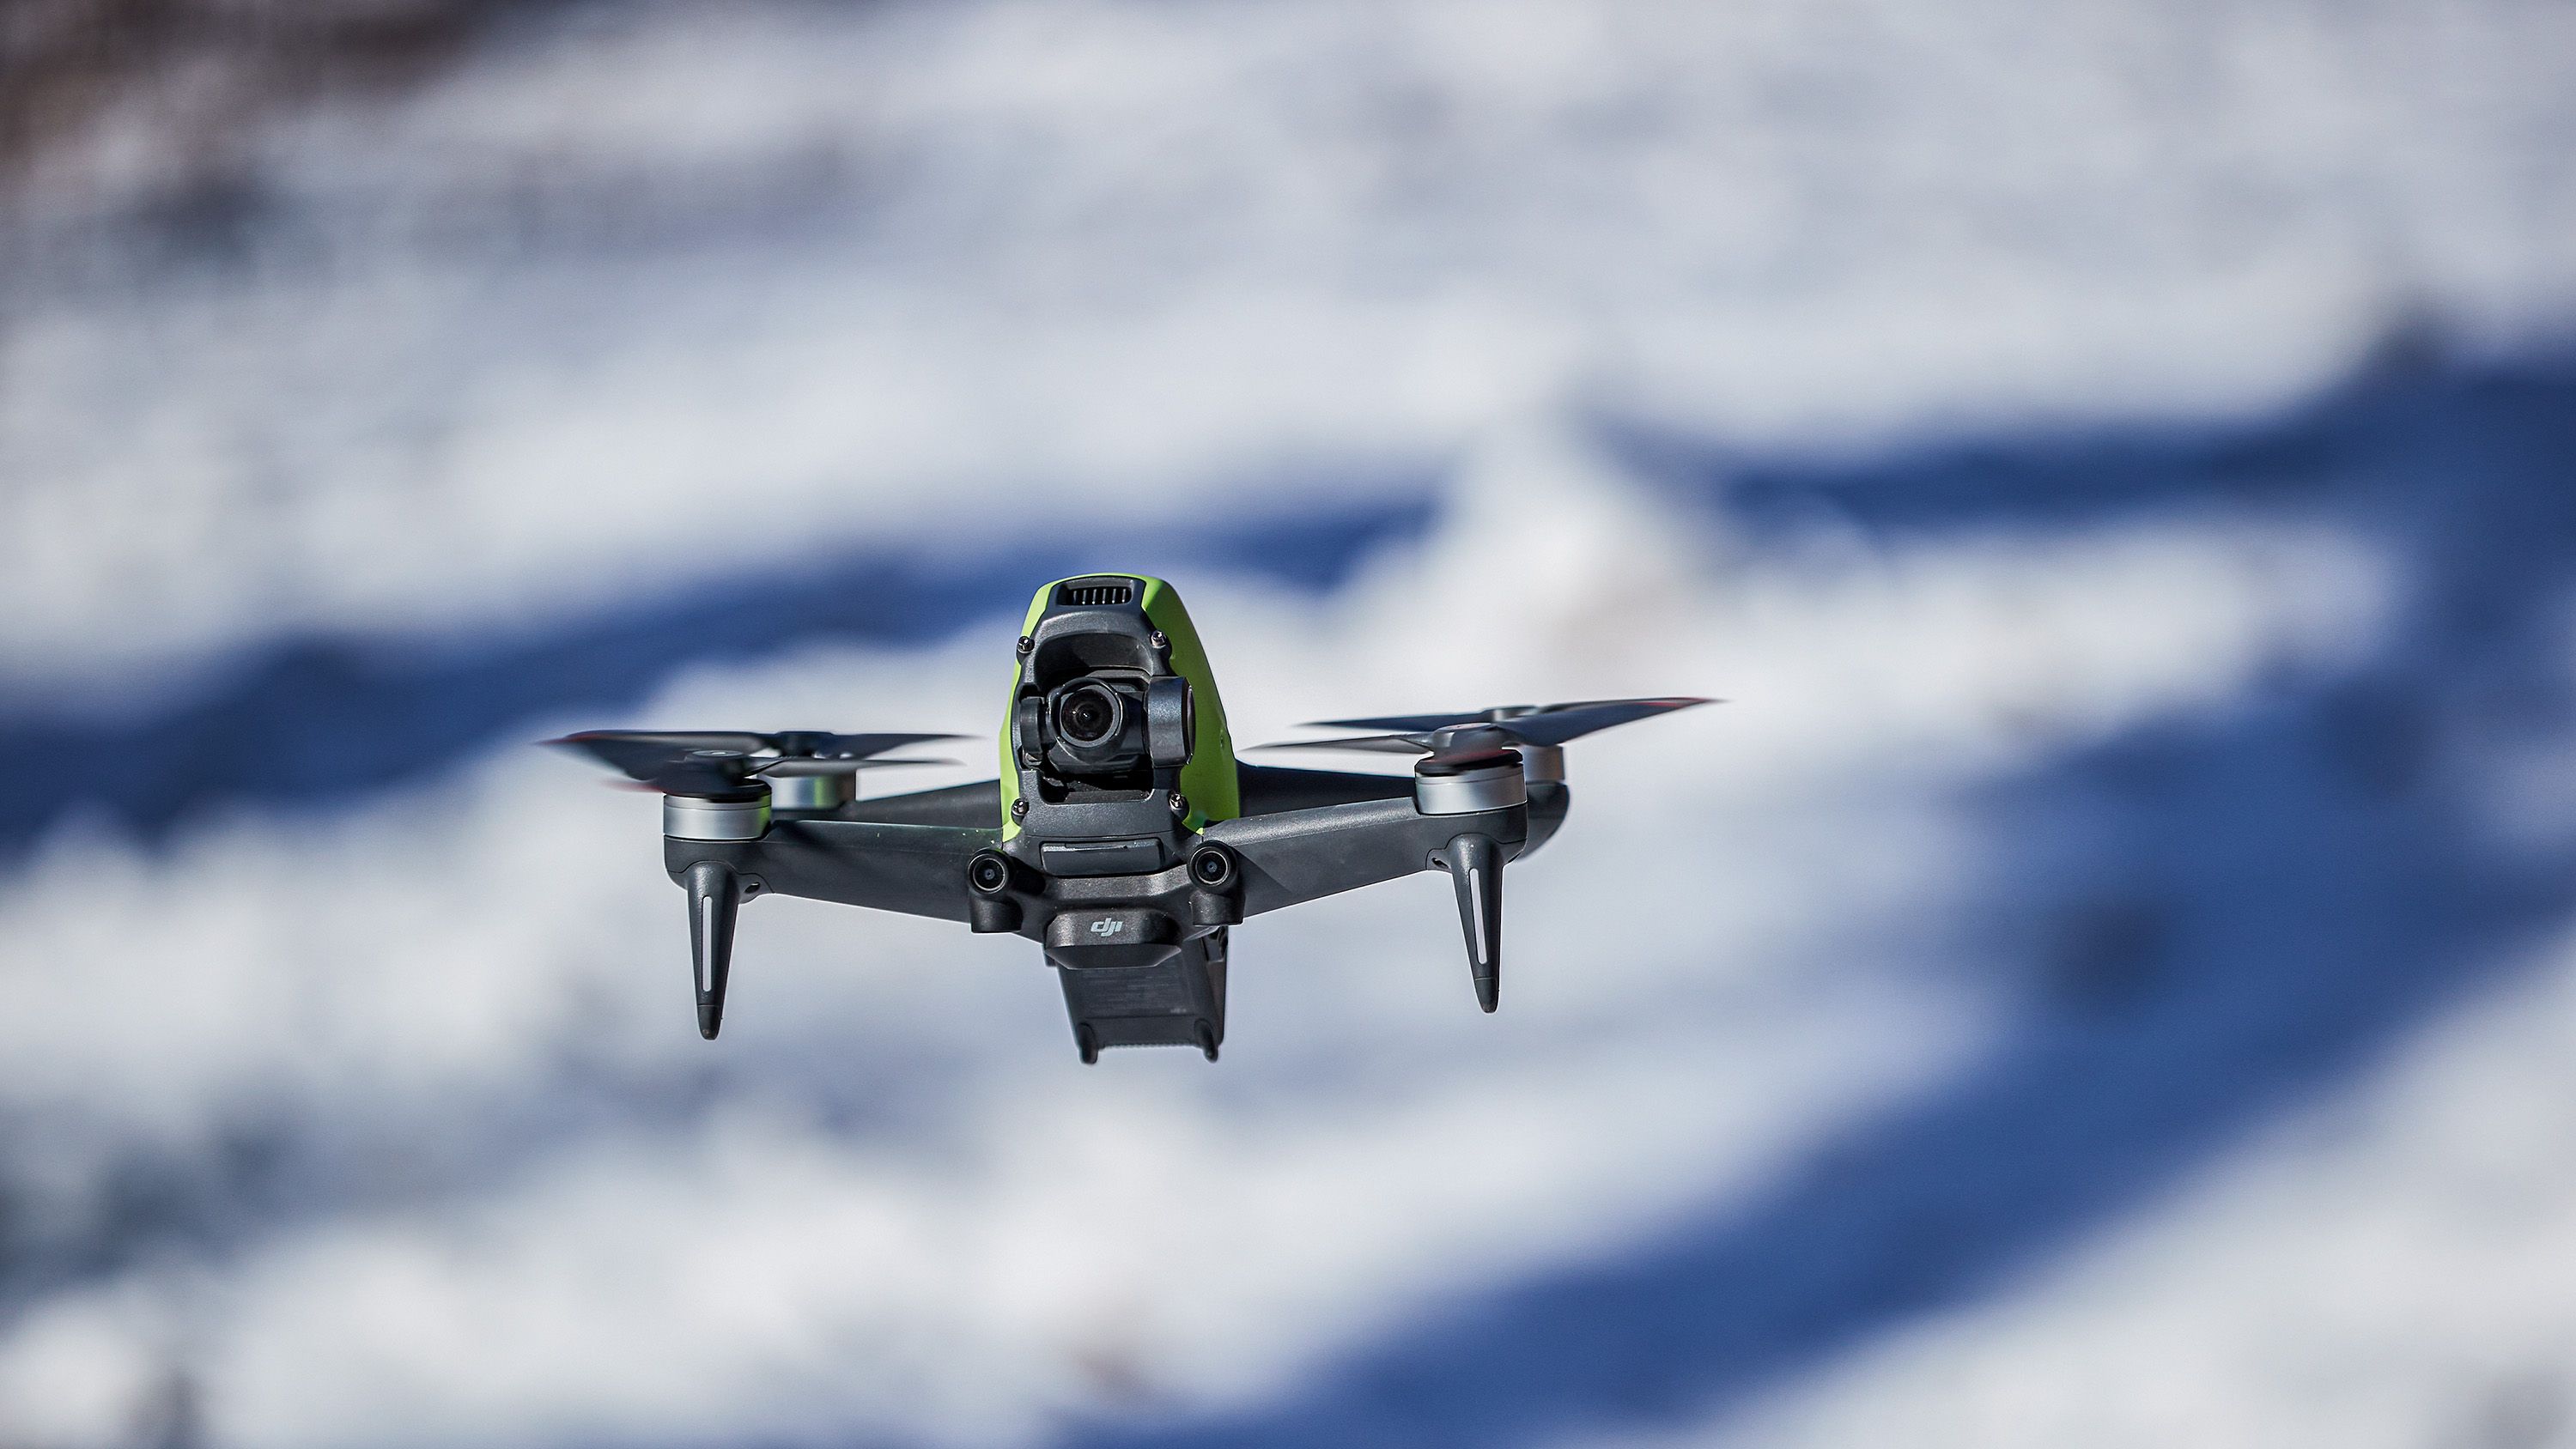 DJI Avata drone review: An incredible first-person flying experience